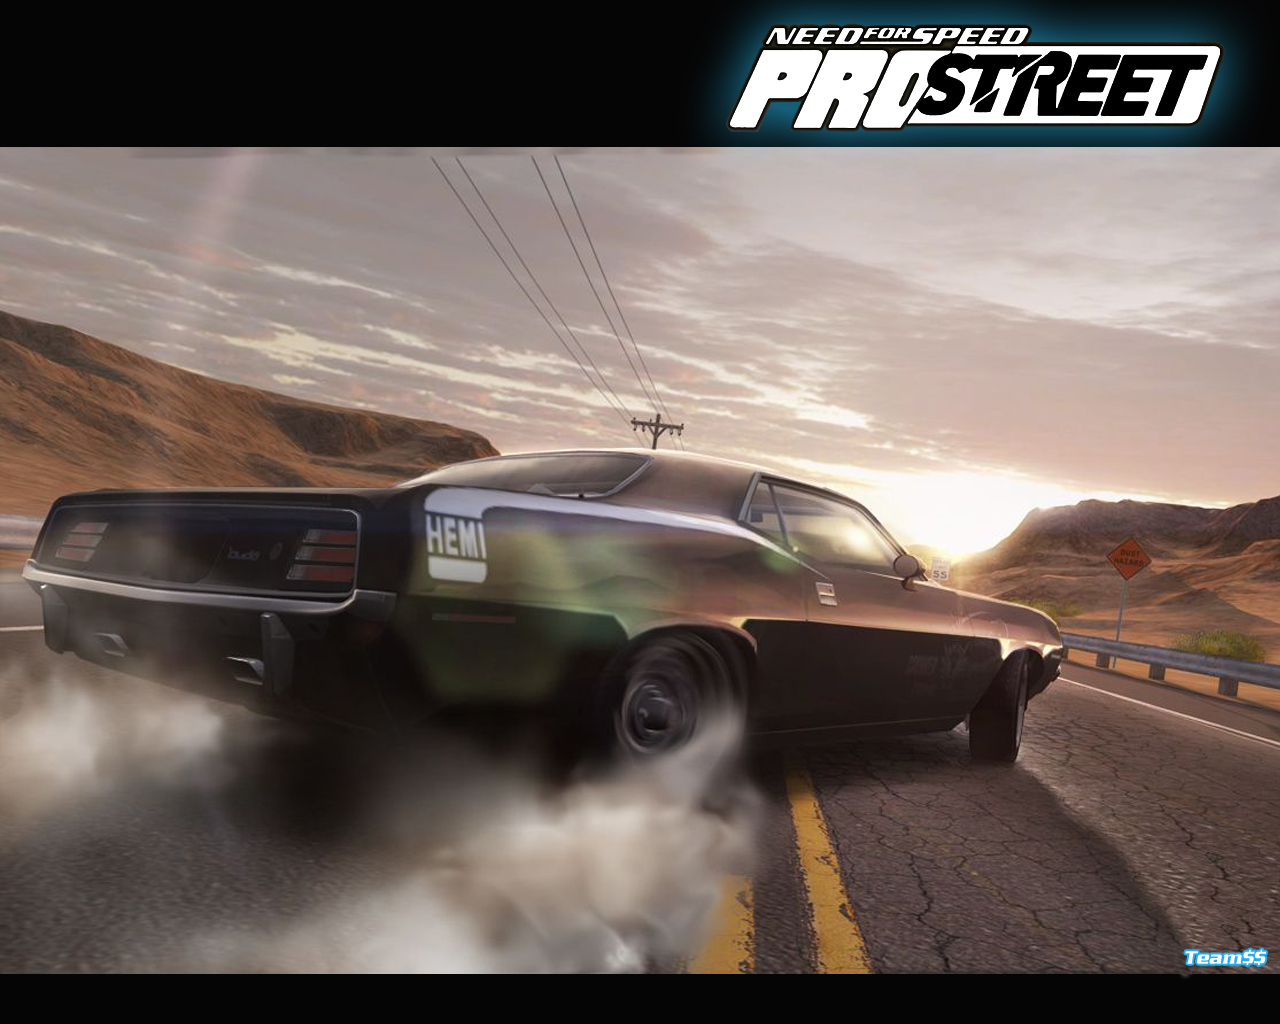 video game, need for speed: prostreet